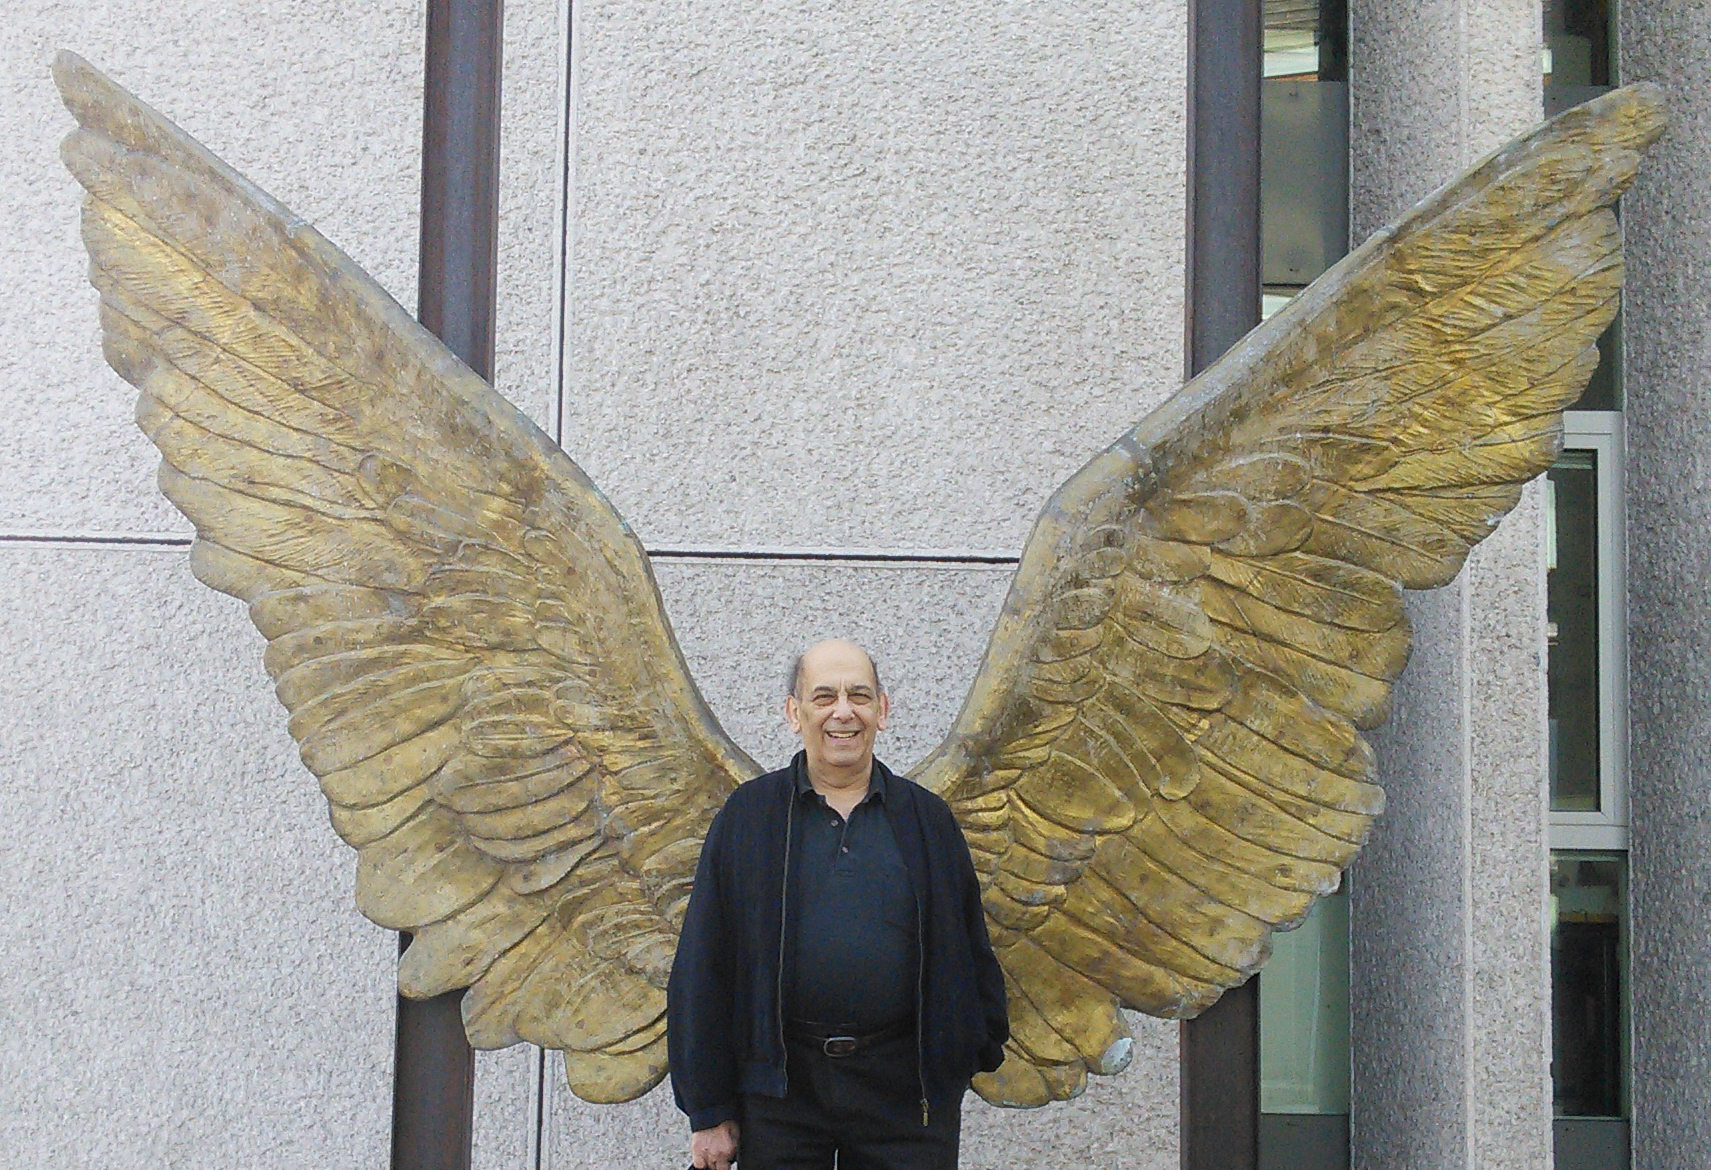 Stan Persky in front of the 'Wings of Mexico' by [[Jorge Marín]] at the Embassy of Mexico, Rauchstraße 27, Berlin-Tiergarten